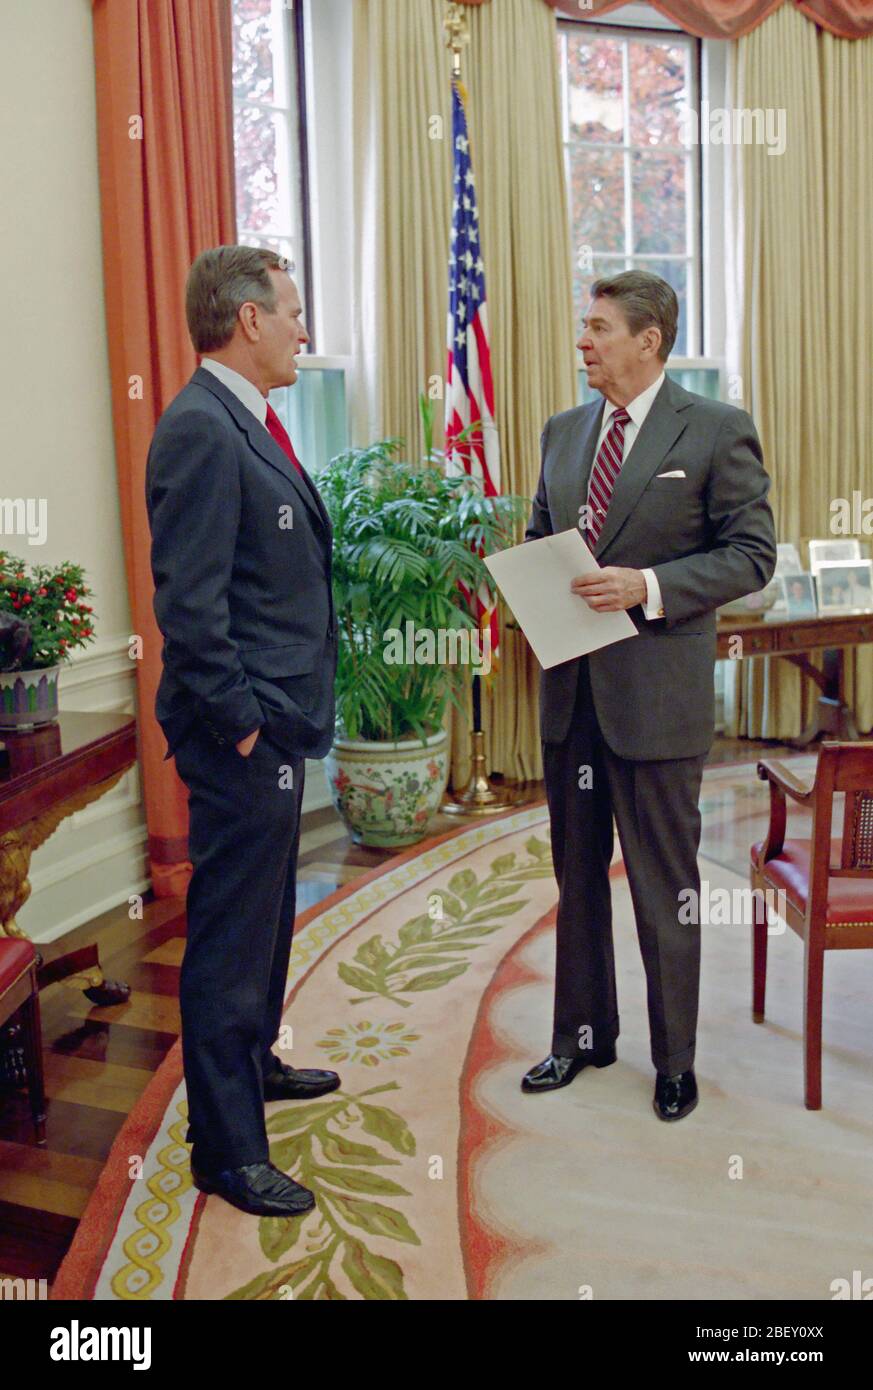 11/10/1988 President Reagan talking with Vice President Bush in the Oval Office Stock Photo